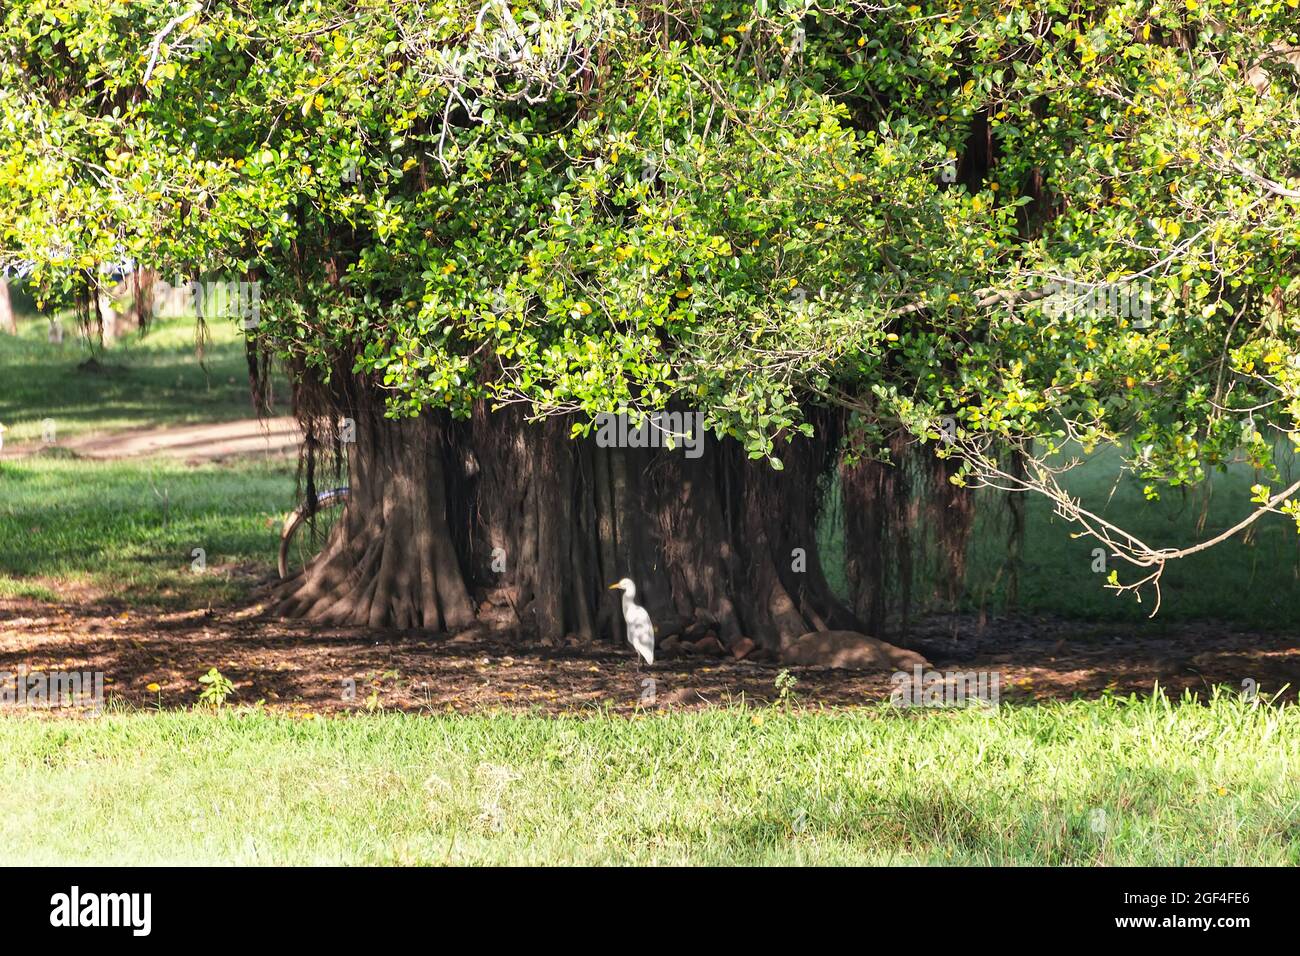 Winter tropical treescape. An old Banyan, air root and buttress root, and a white egret sit under the canopy of a tree. Sri Lanka Stock Photo